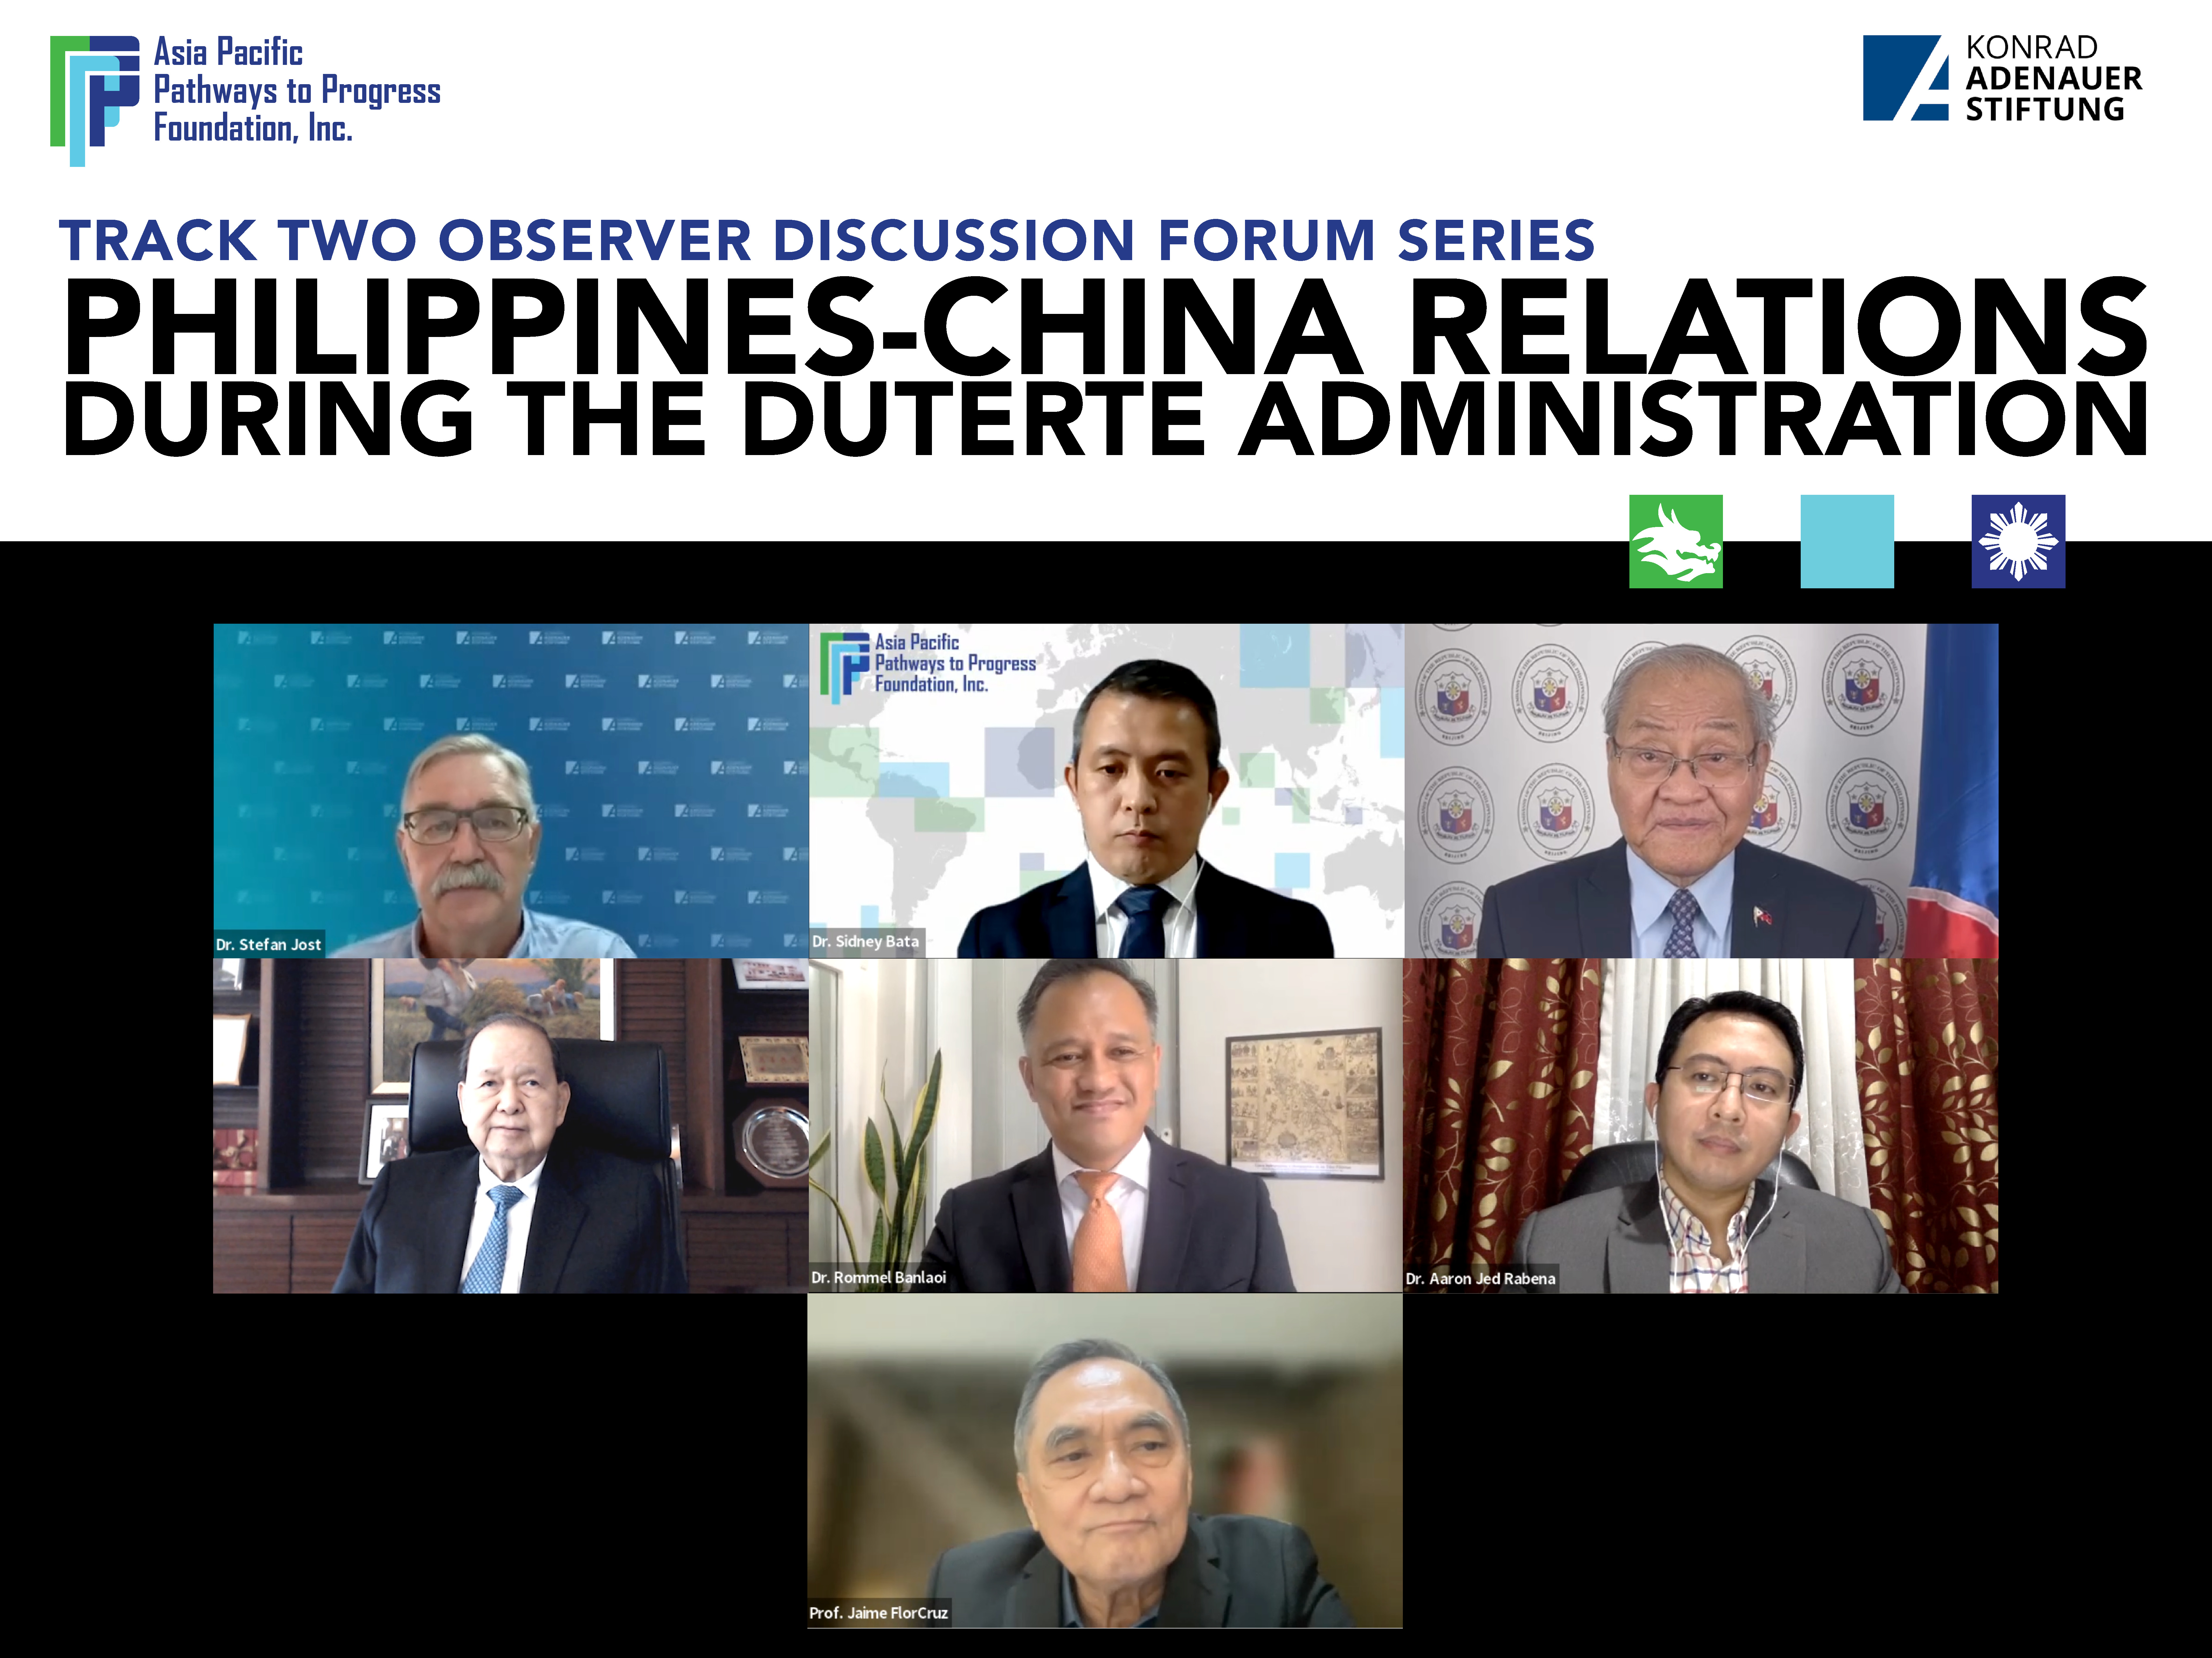 Last TTO Discussion Forum for 2021 Discusses Philippines-China Bilateral Relations